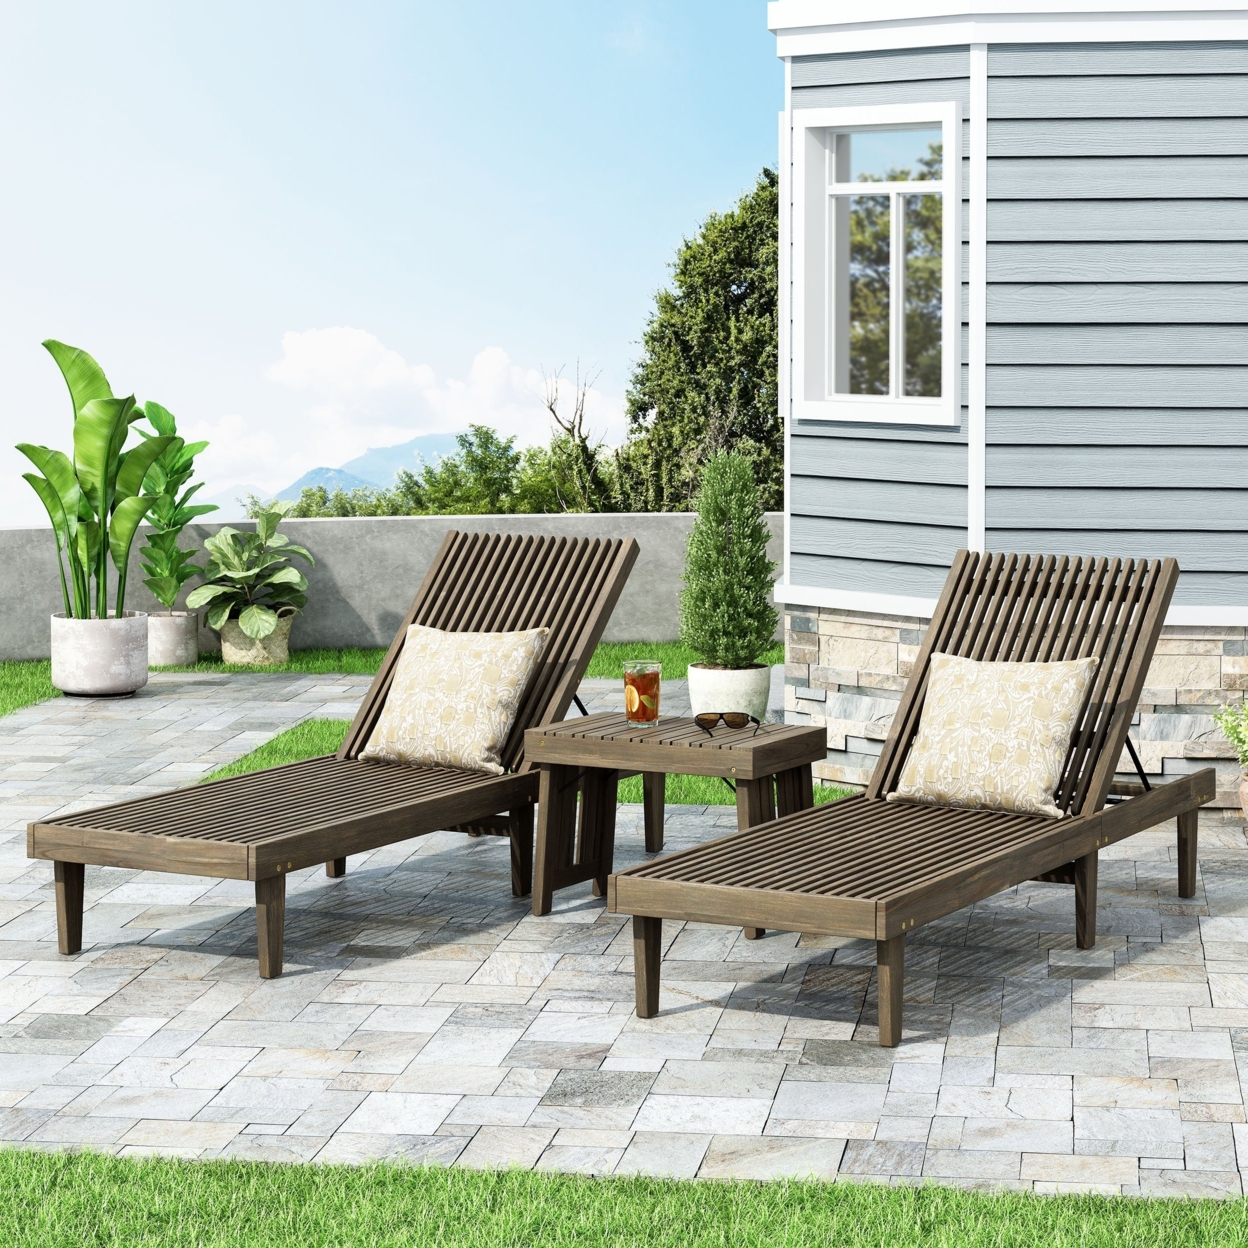 Addisyn Outdoor Acacia Wood 3 Piece Chaise Lounge Set - Gray